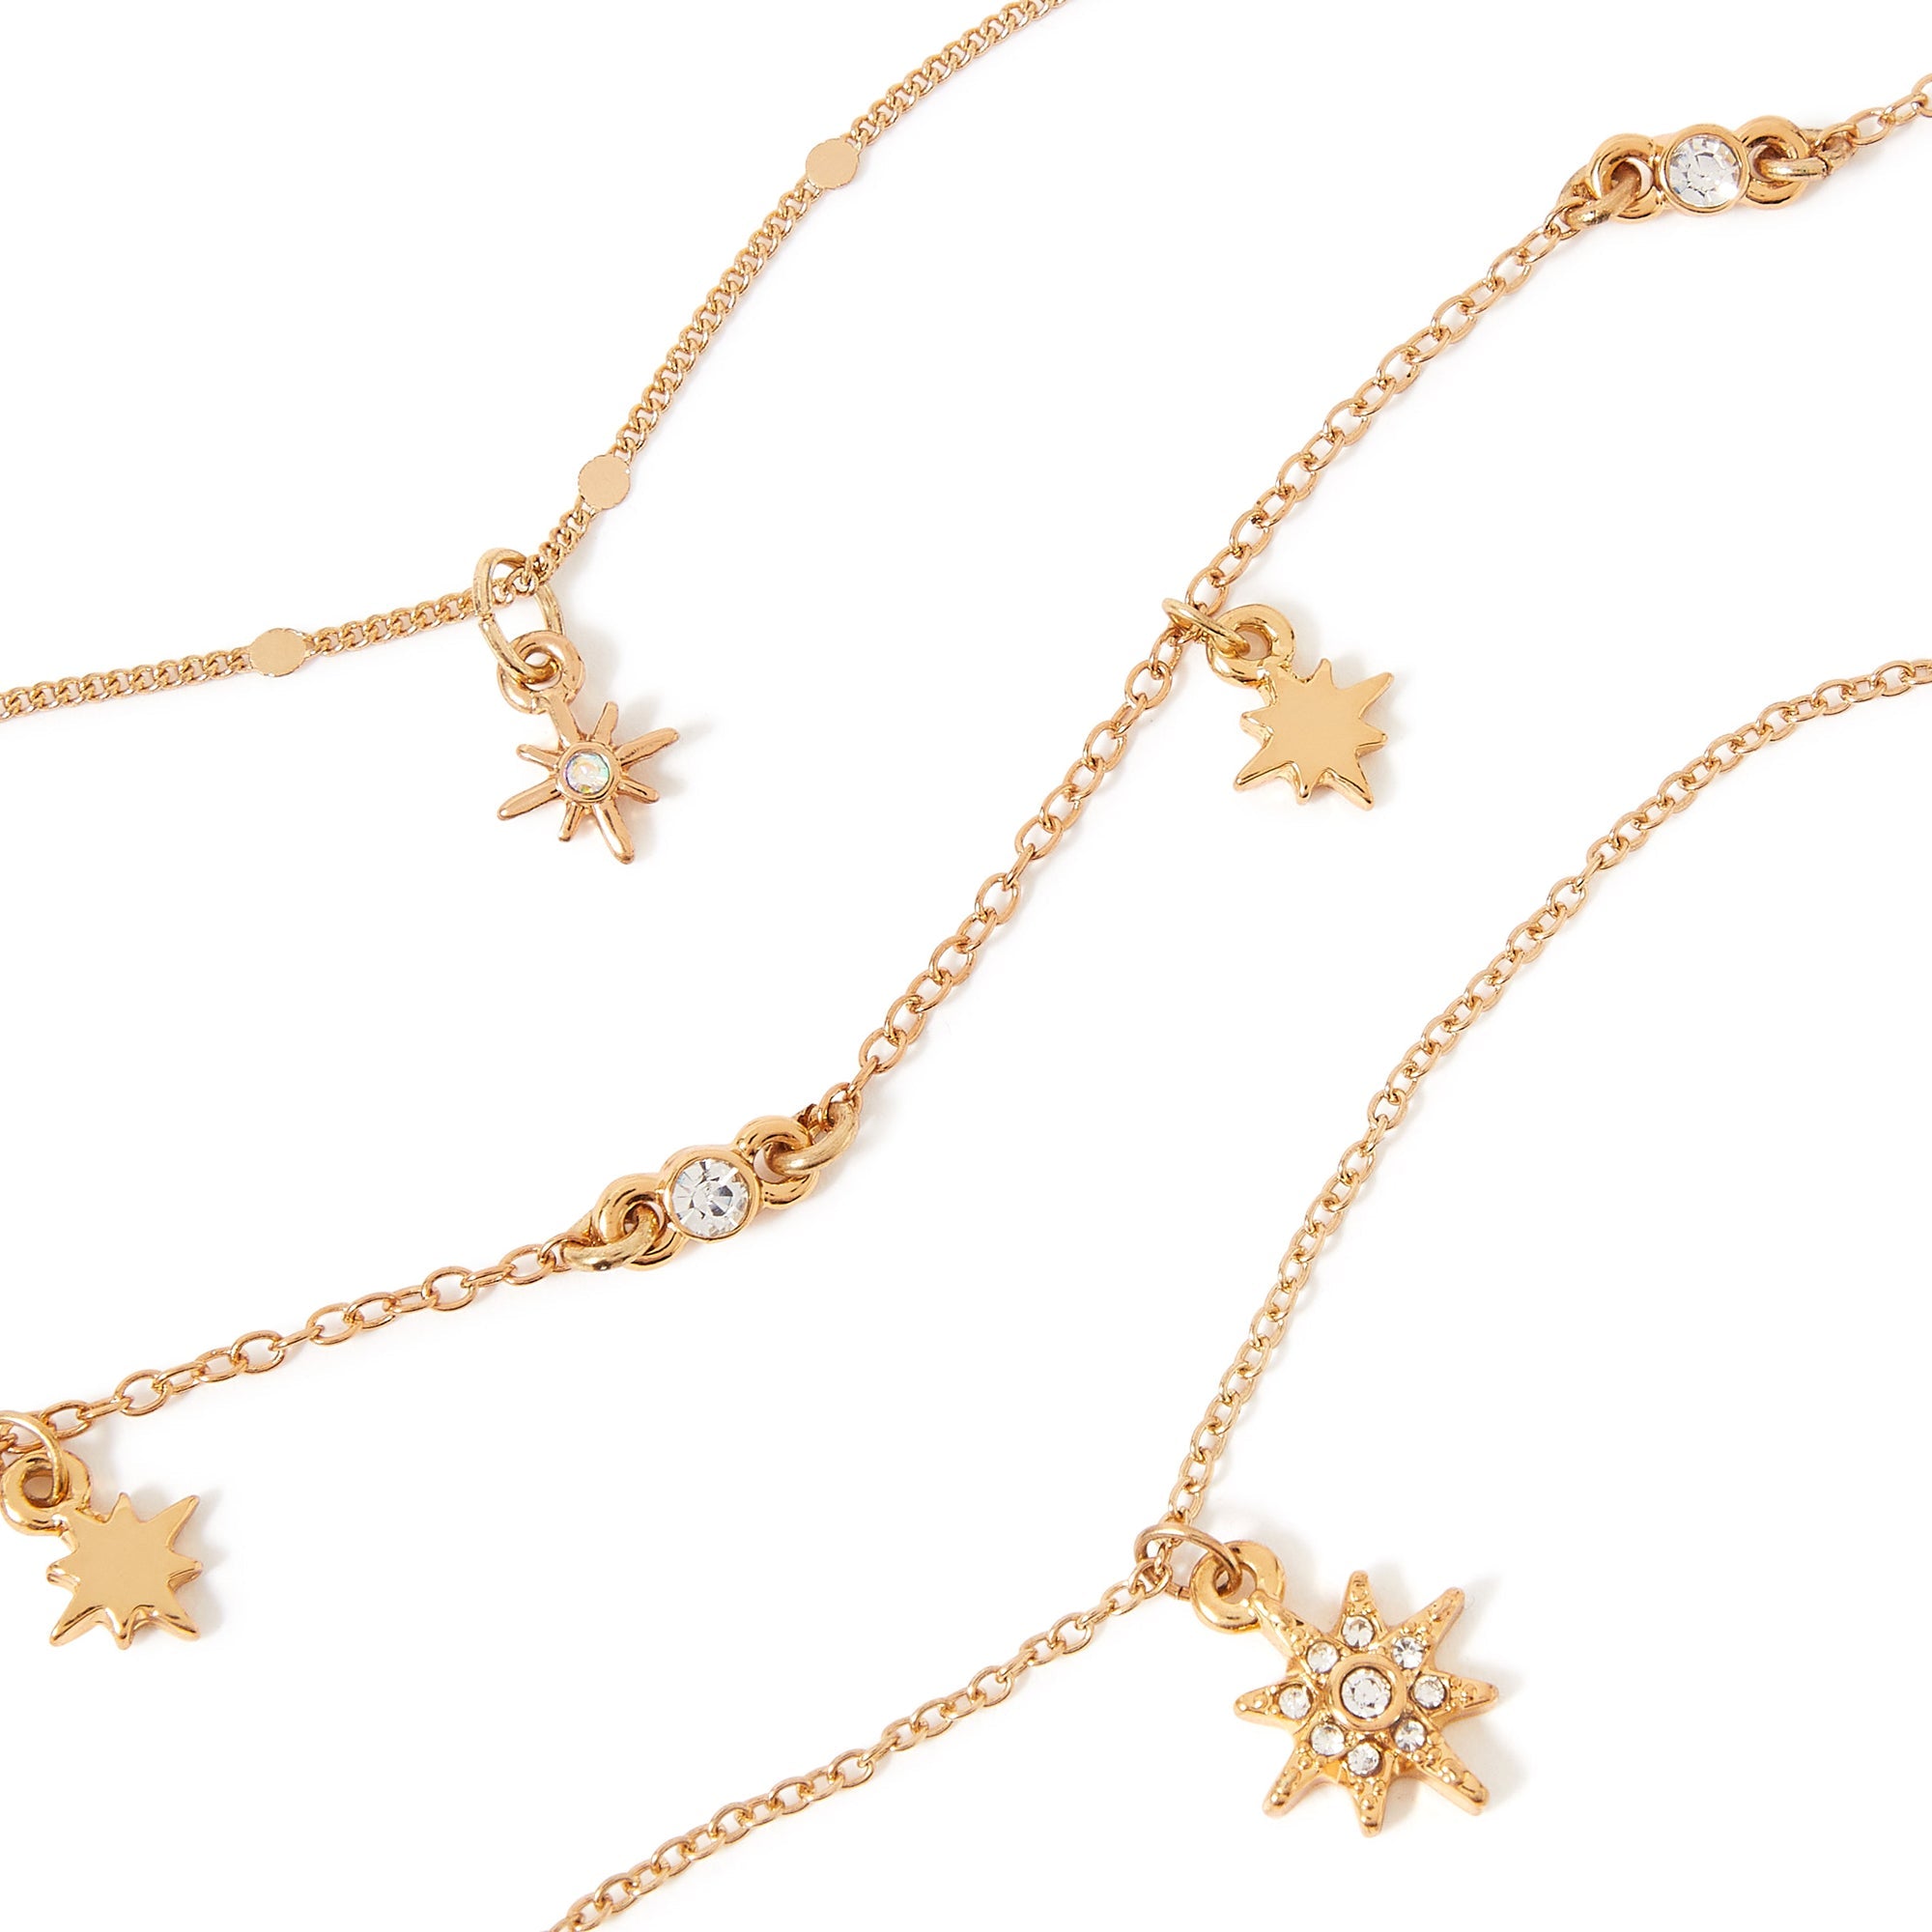 Accessorize London Women's Crystal Celestial Set of 3 Starry Necklaces